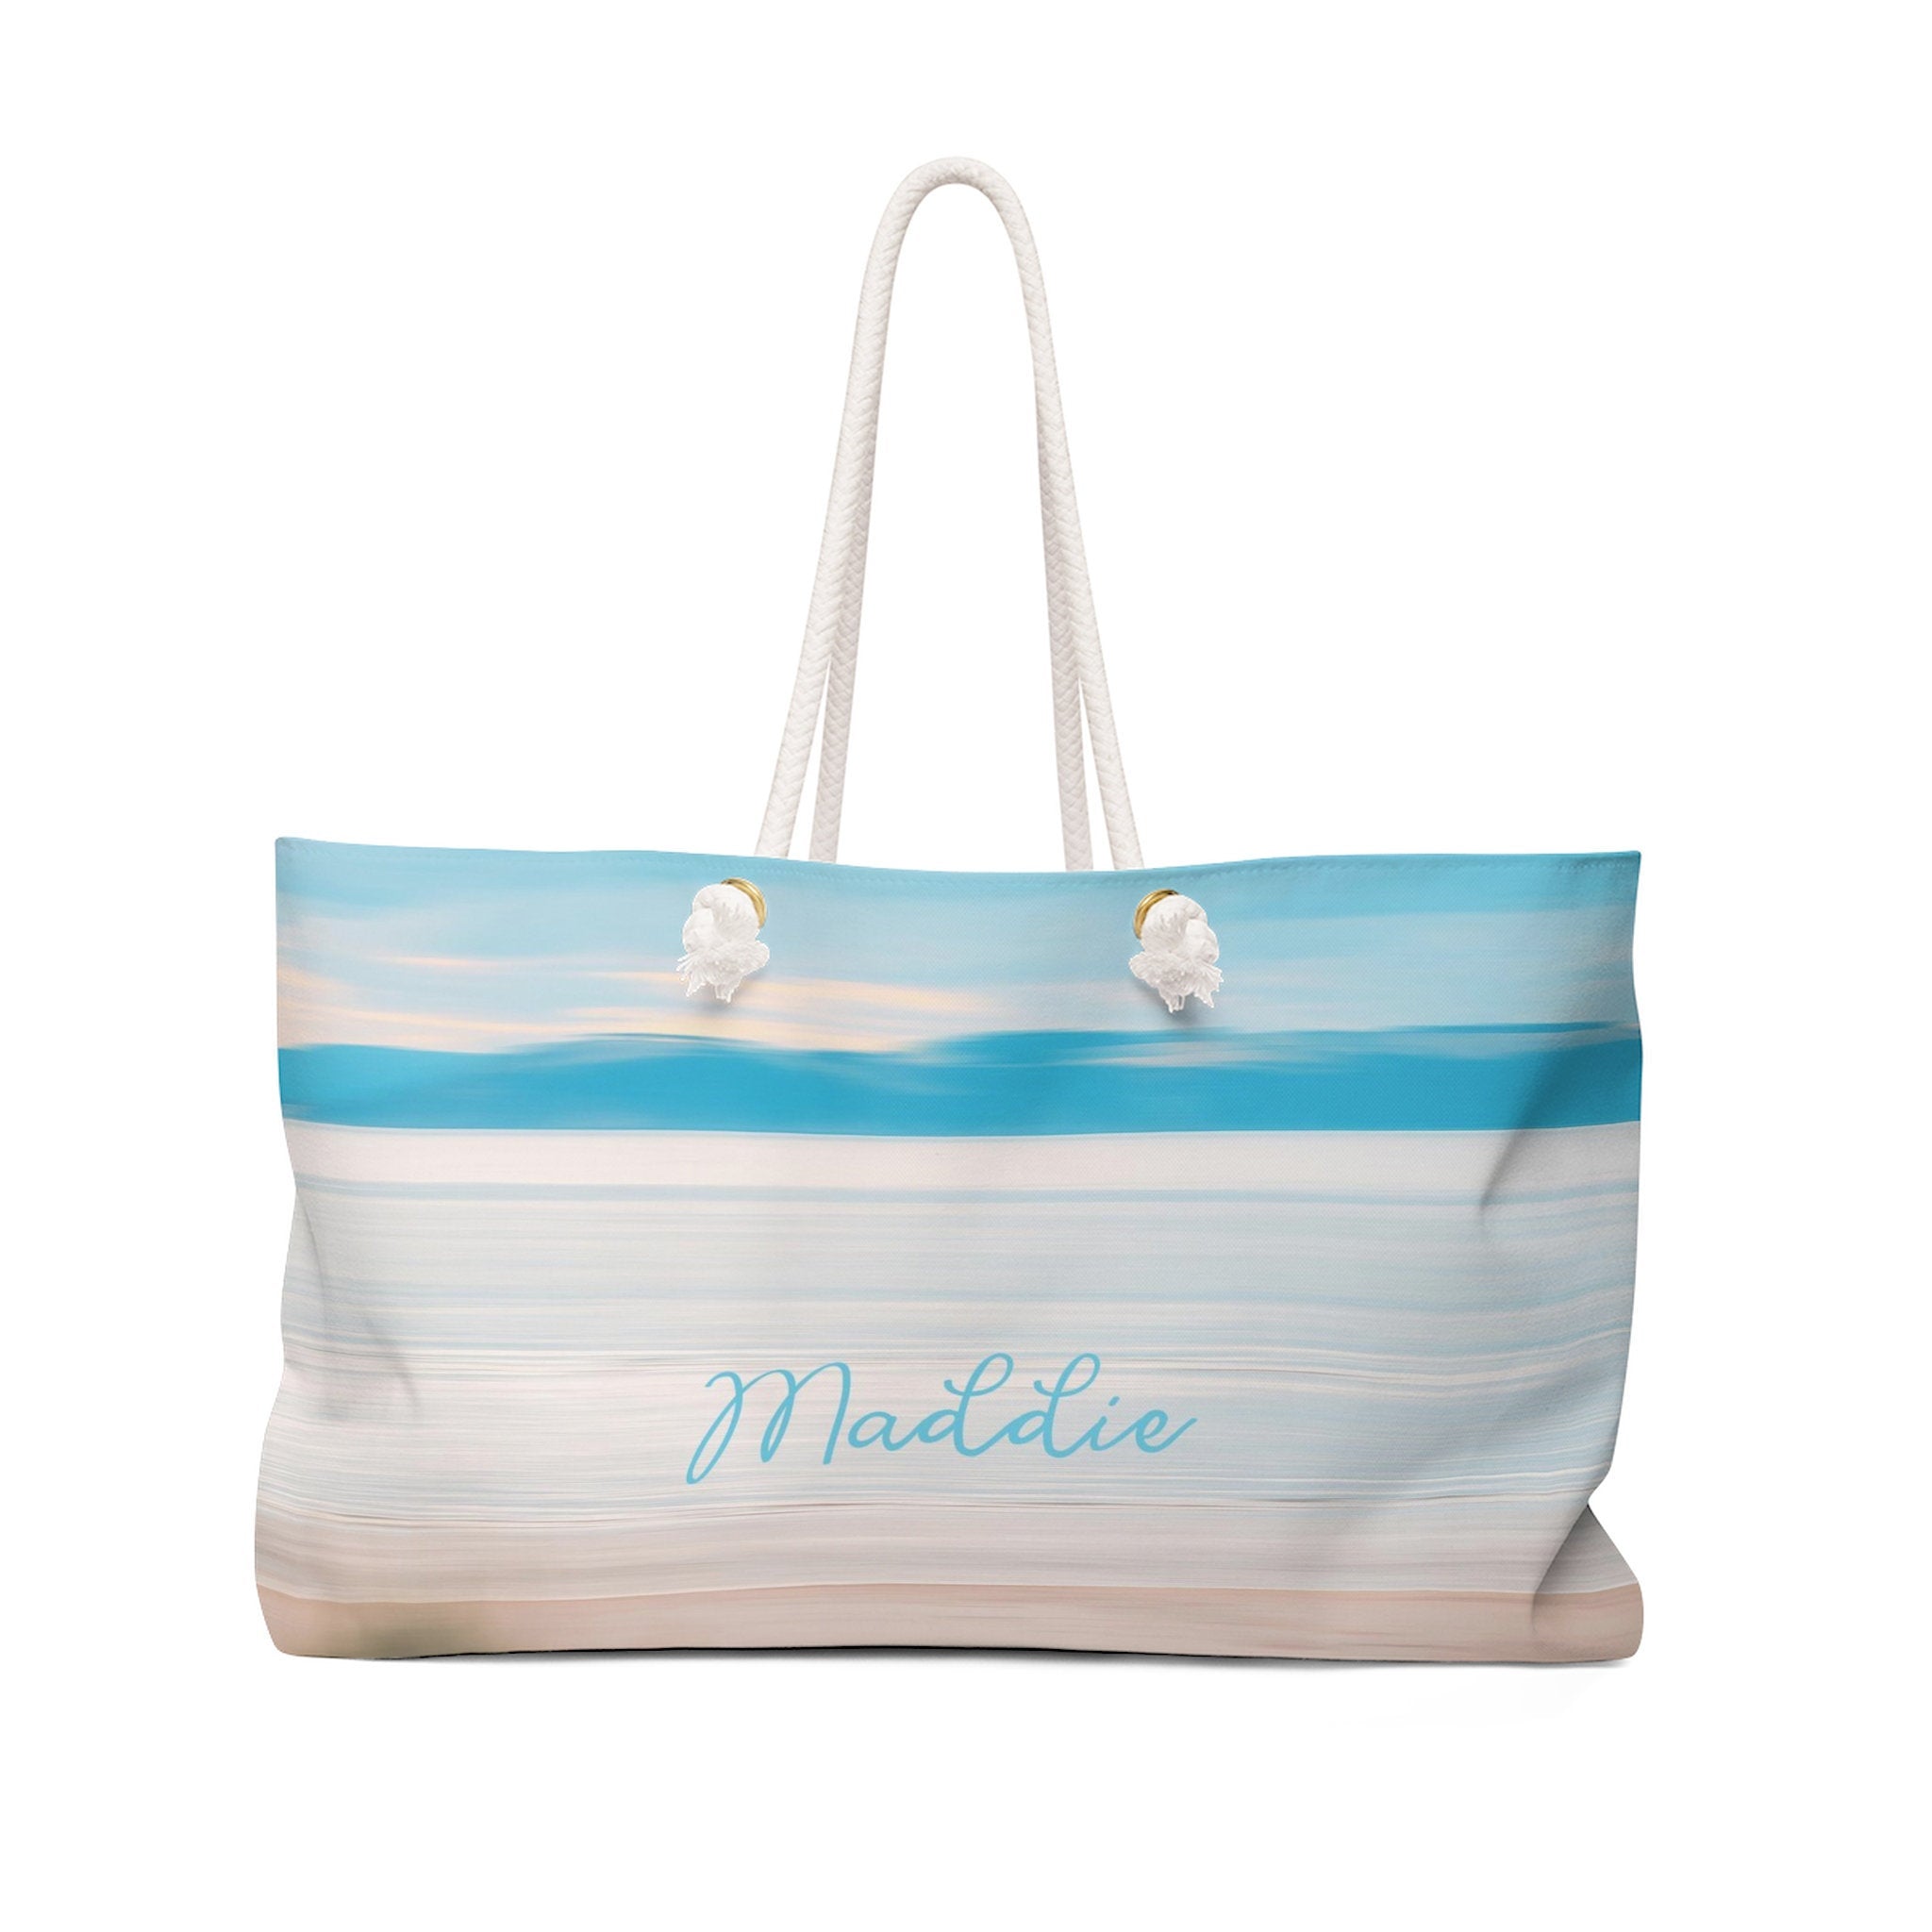 Personalized Tote Bag with Rope Handles - Blue Beach Scene - WKROPE10